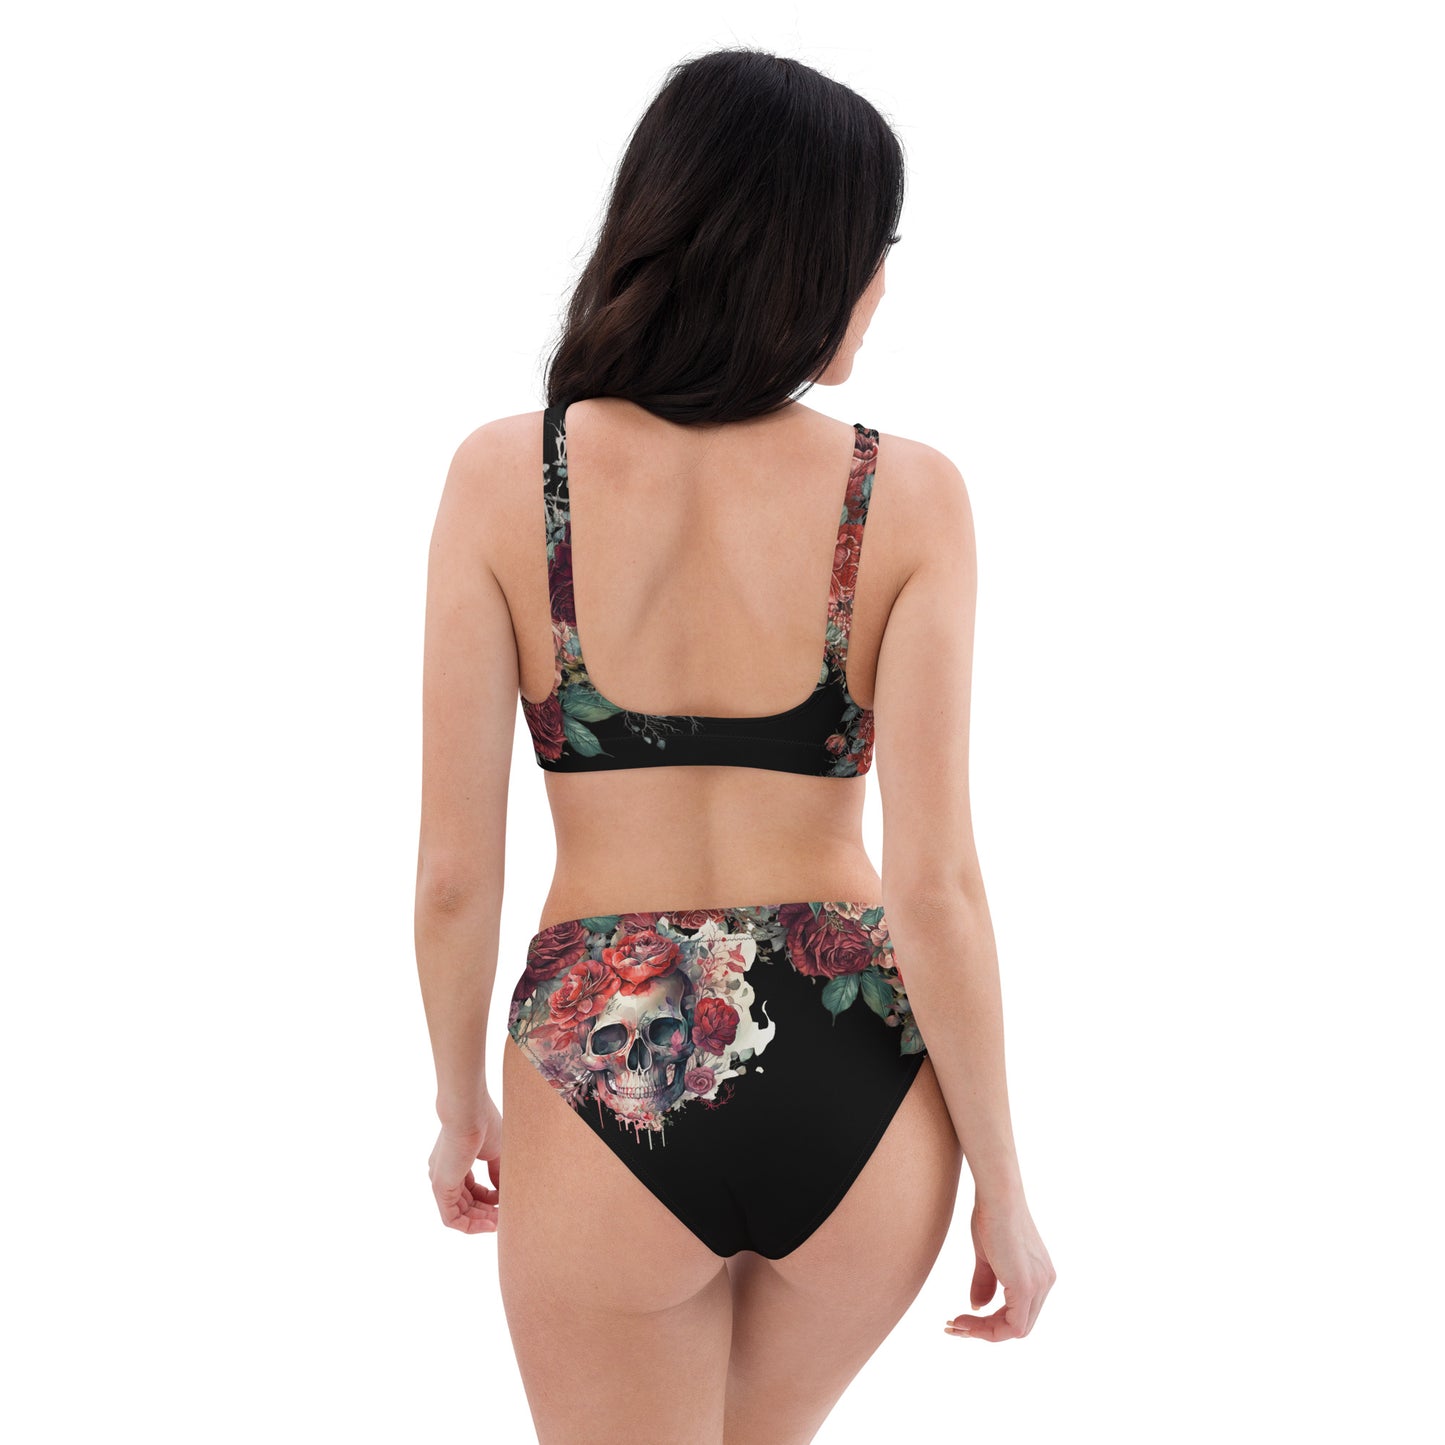 Flower Skull Red and Black Two Piece high-waisted bikini